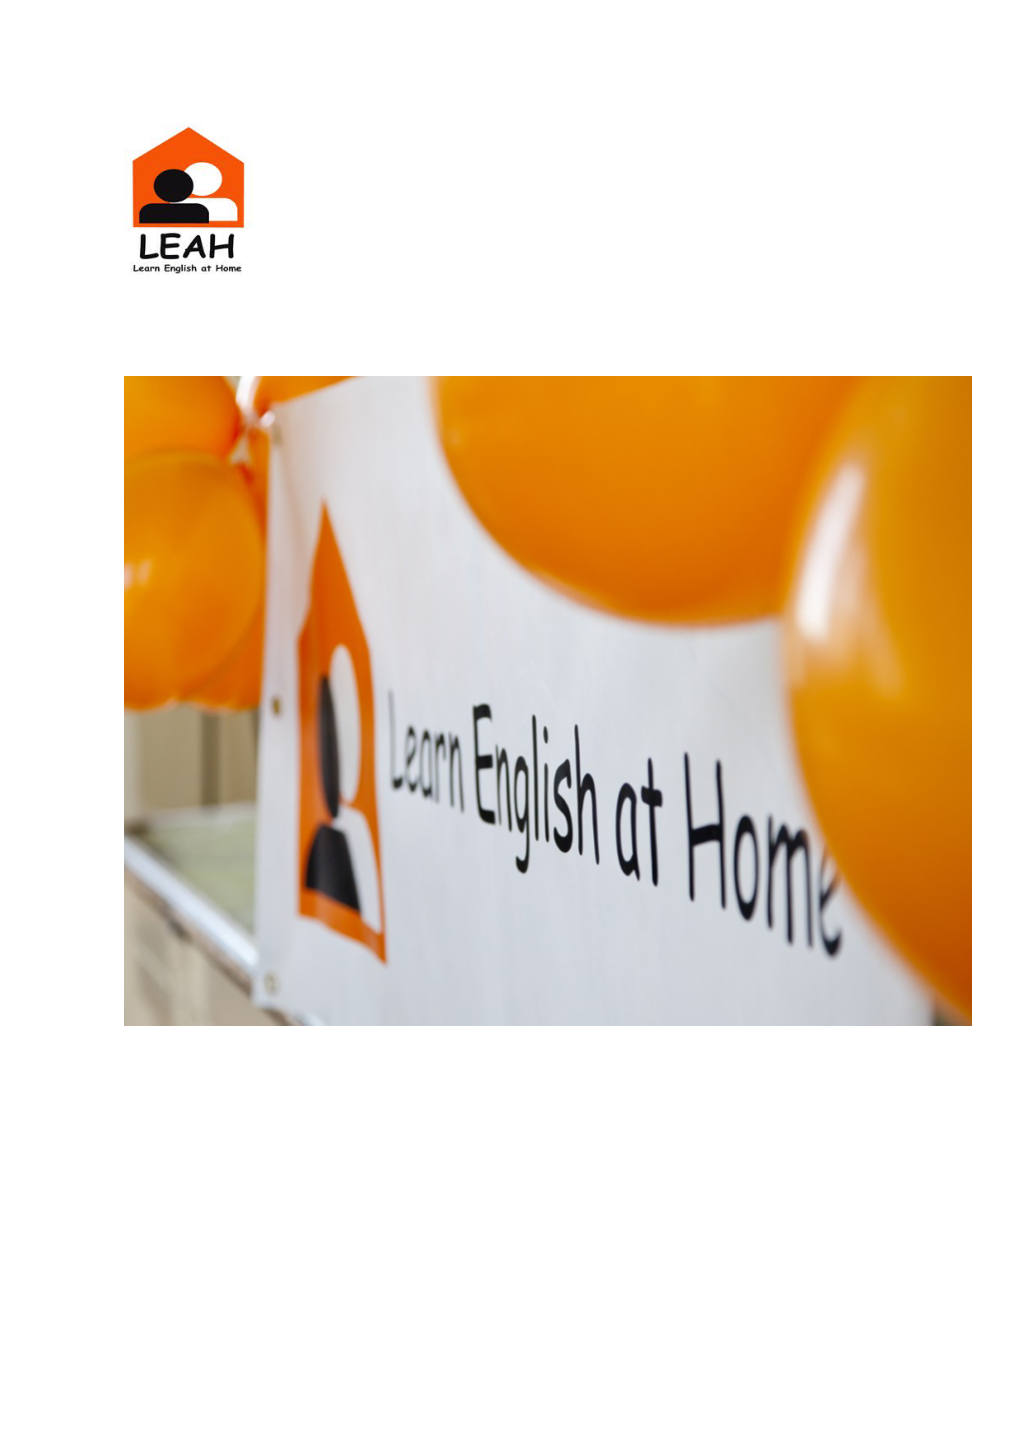 Learn English at Home Trustee